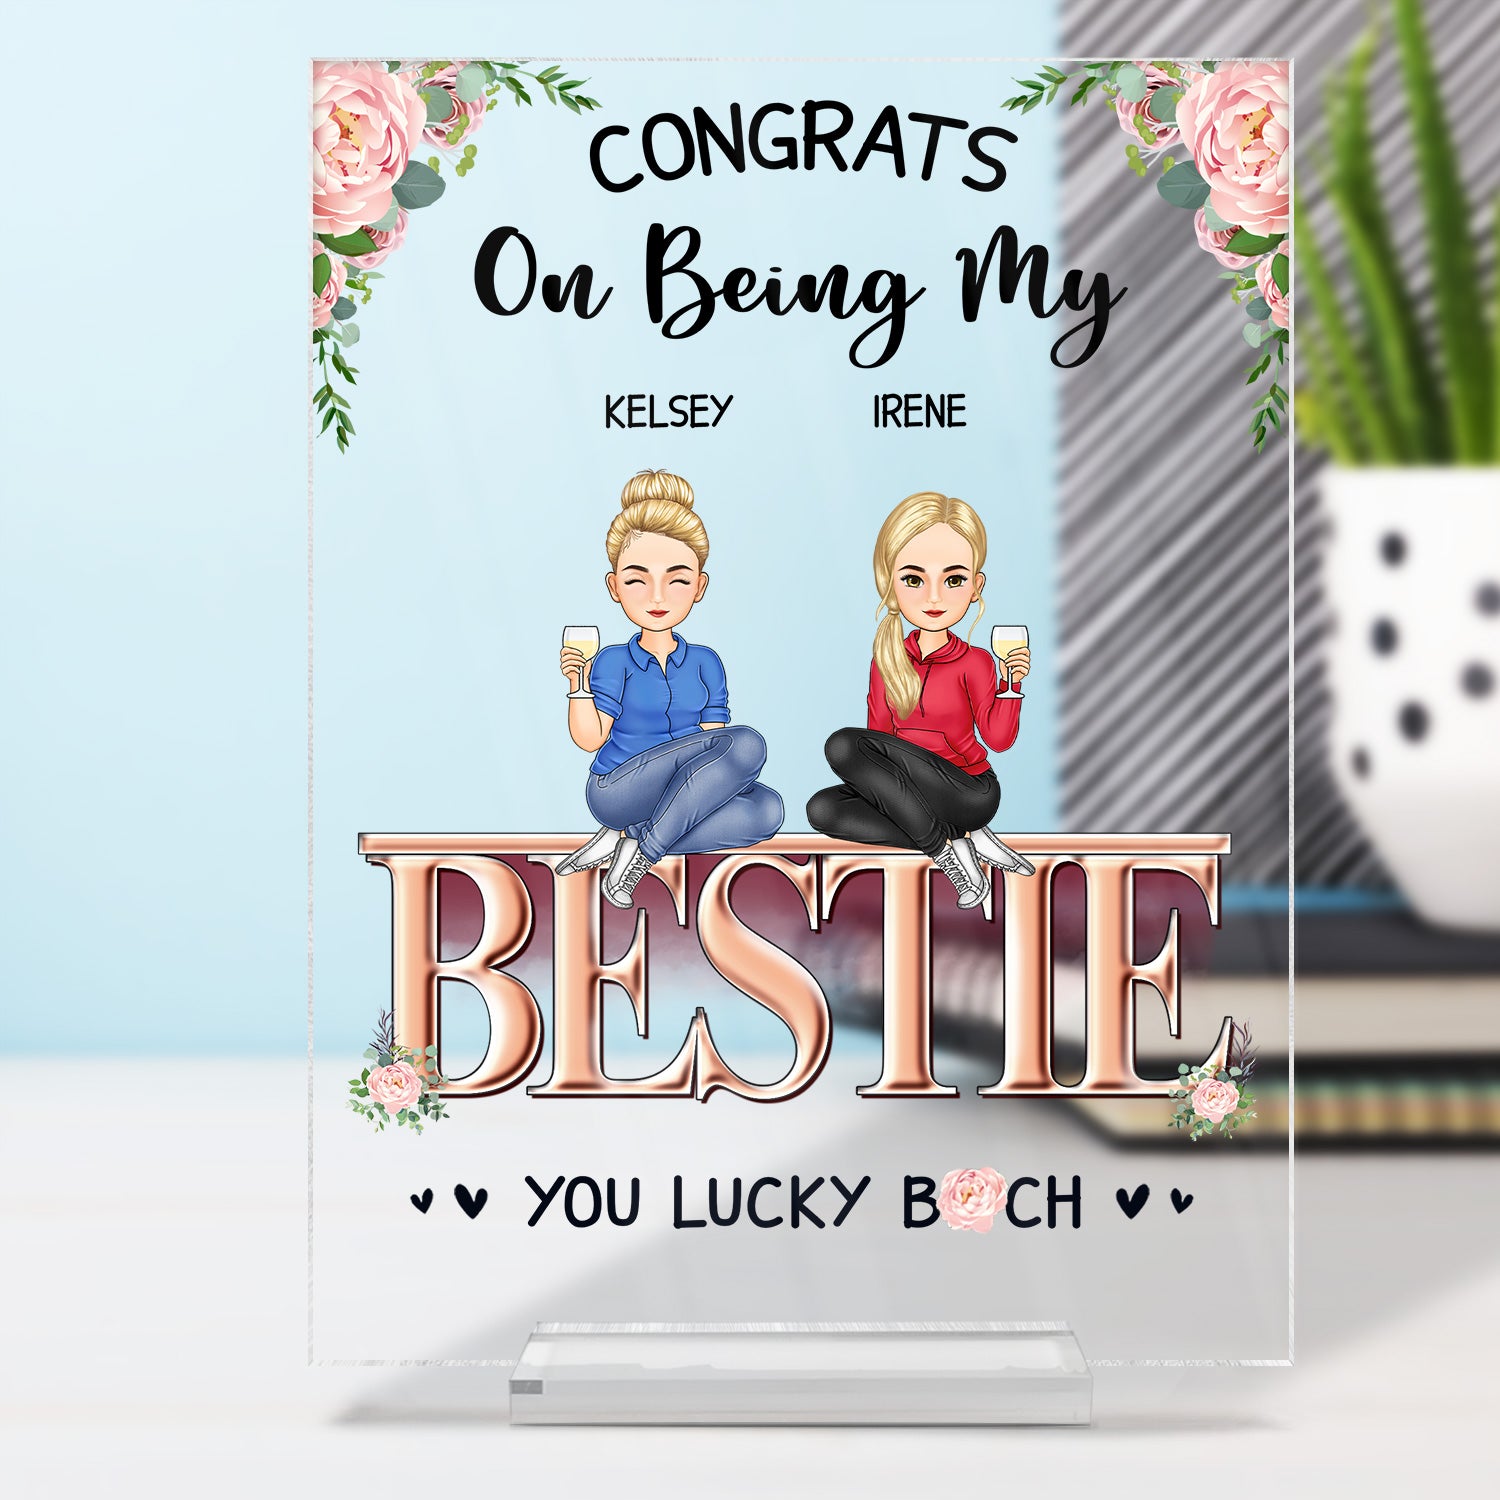 Congrats On Being My Besties - Gift For Besite - Personalized Vertical Rectangle Acrylic Plaque